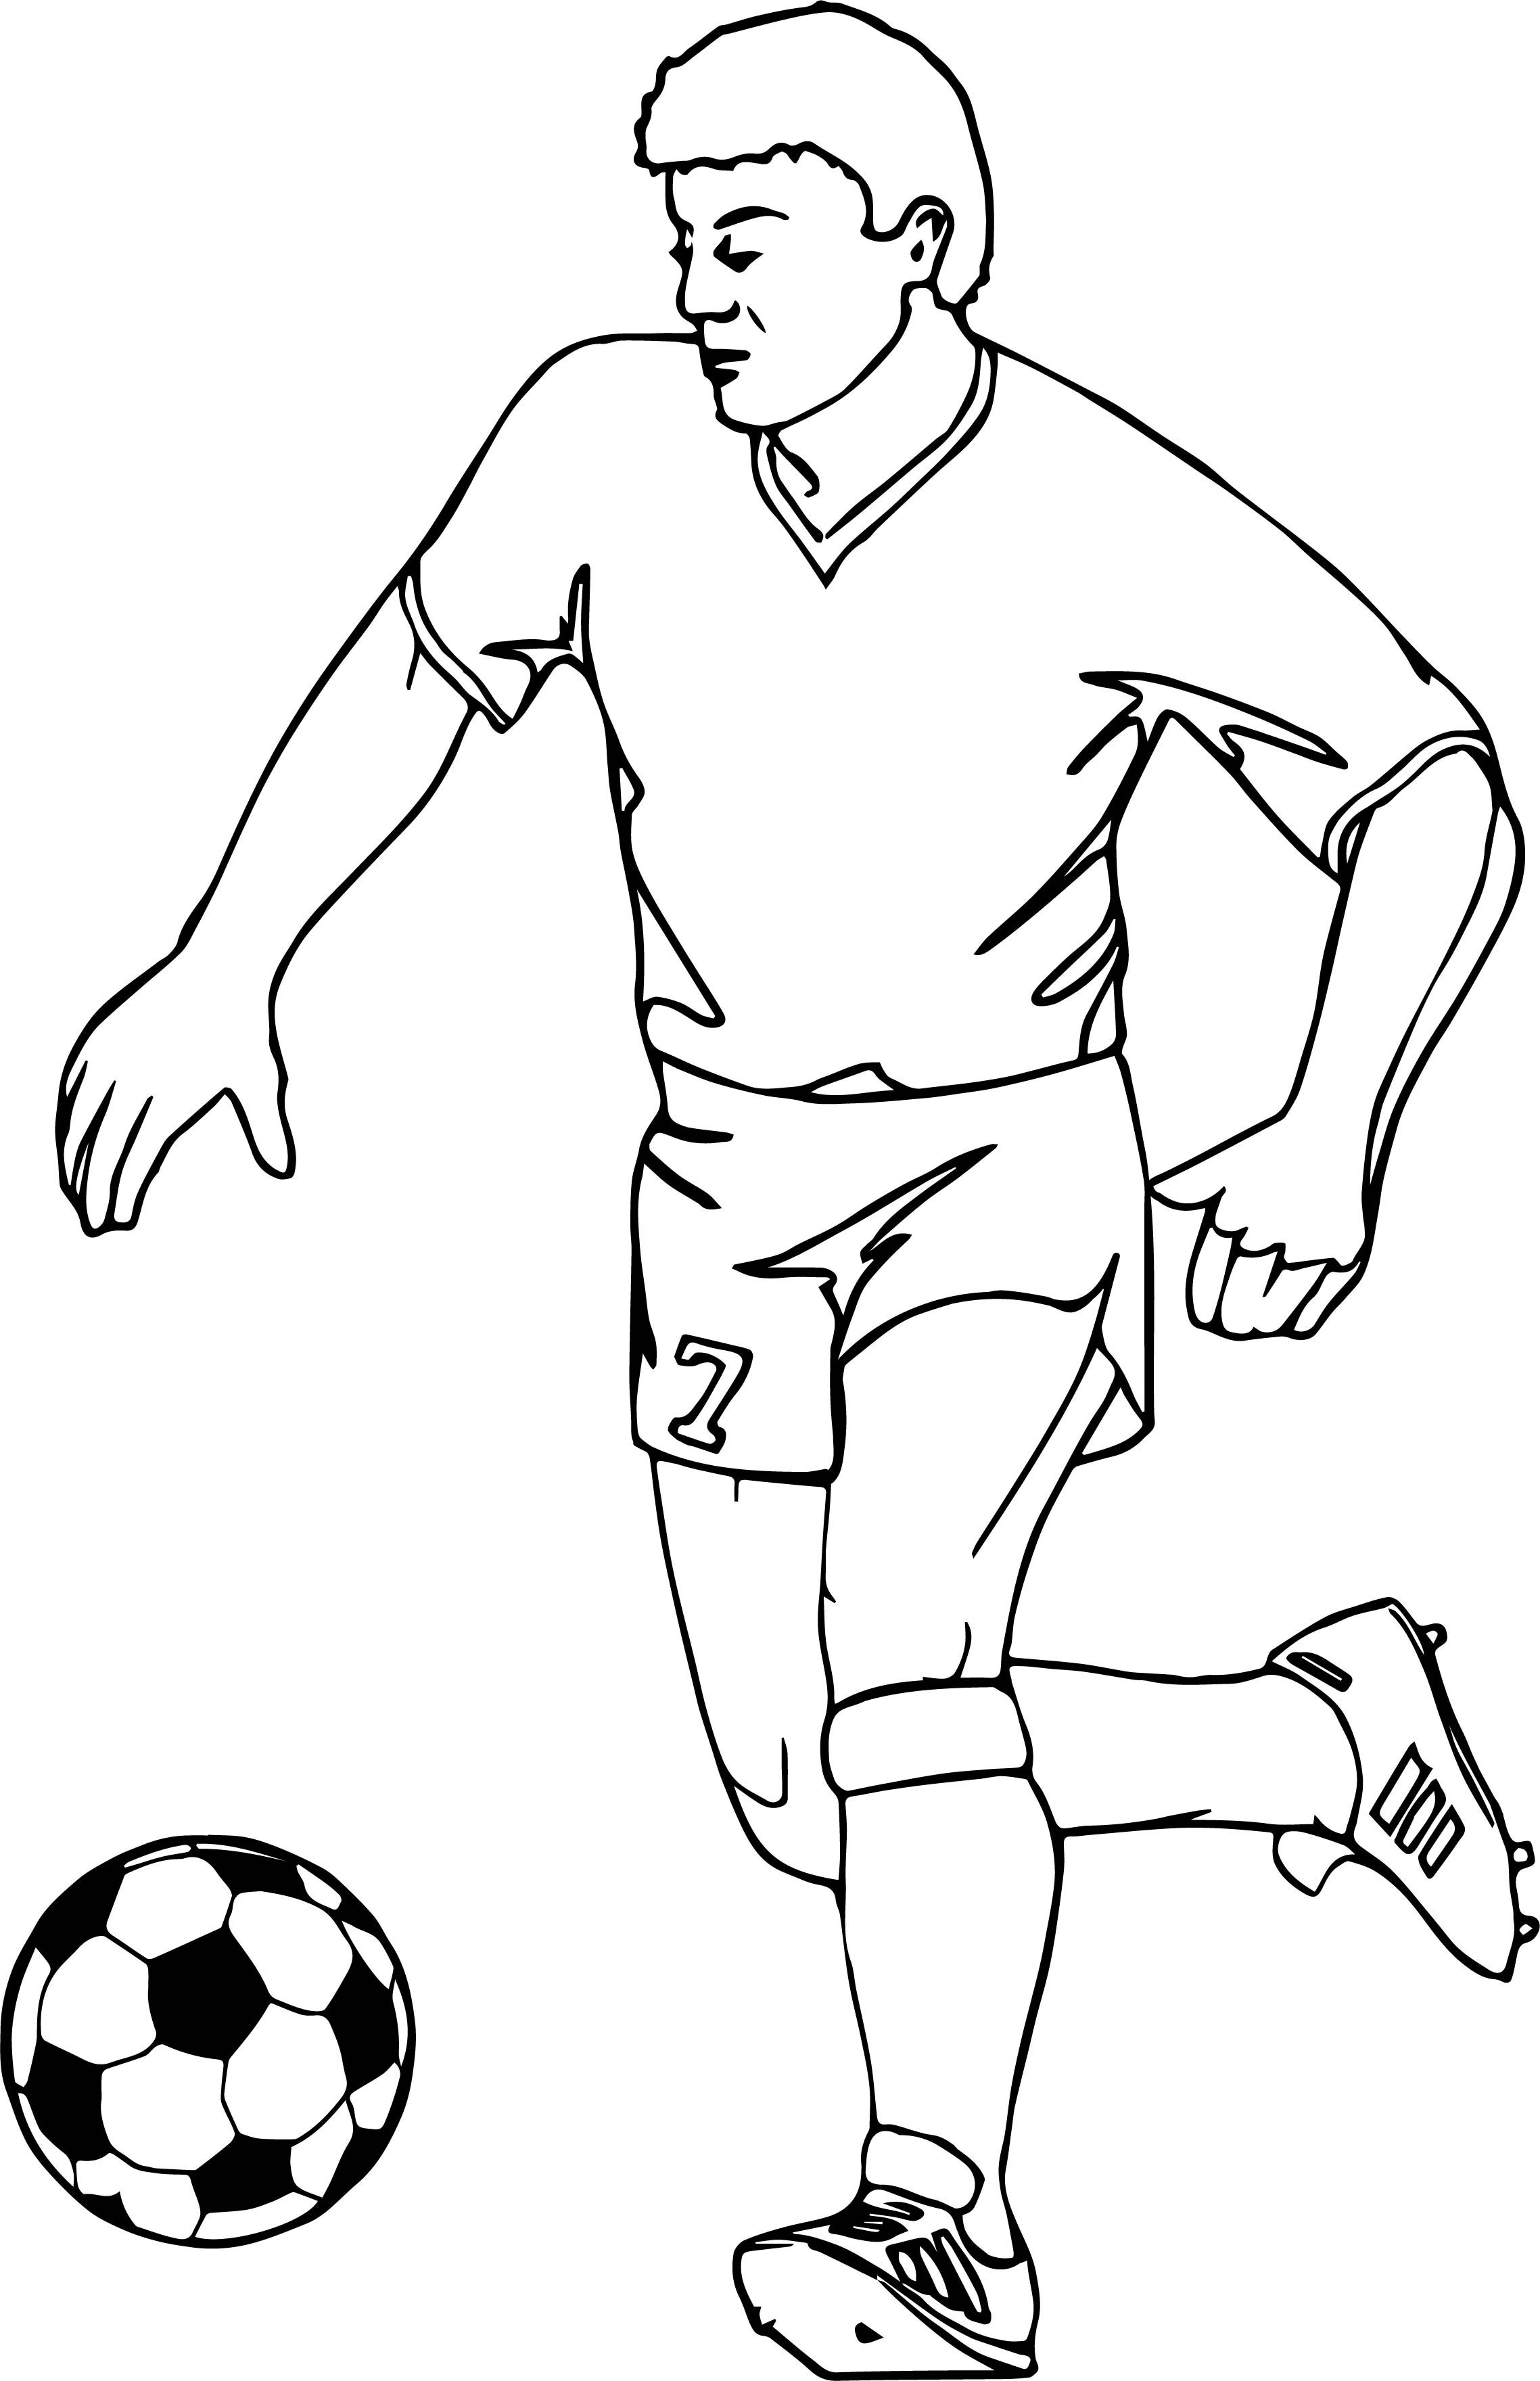 Printable Coloring Pages For Boys Soccre
 Soccer Coloring Pages Ronaldo thekindproject